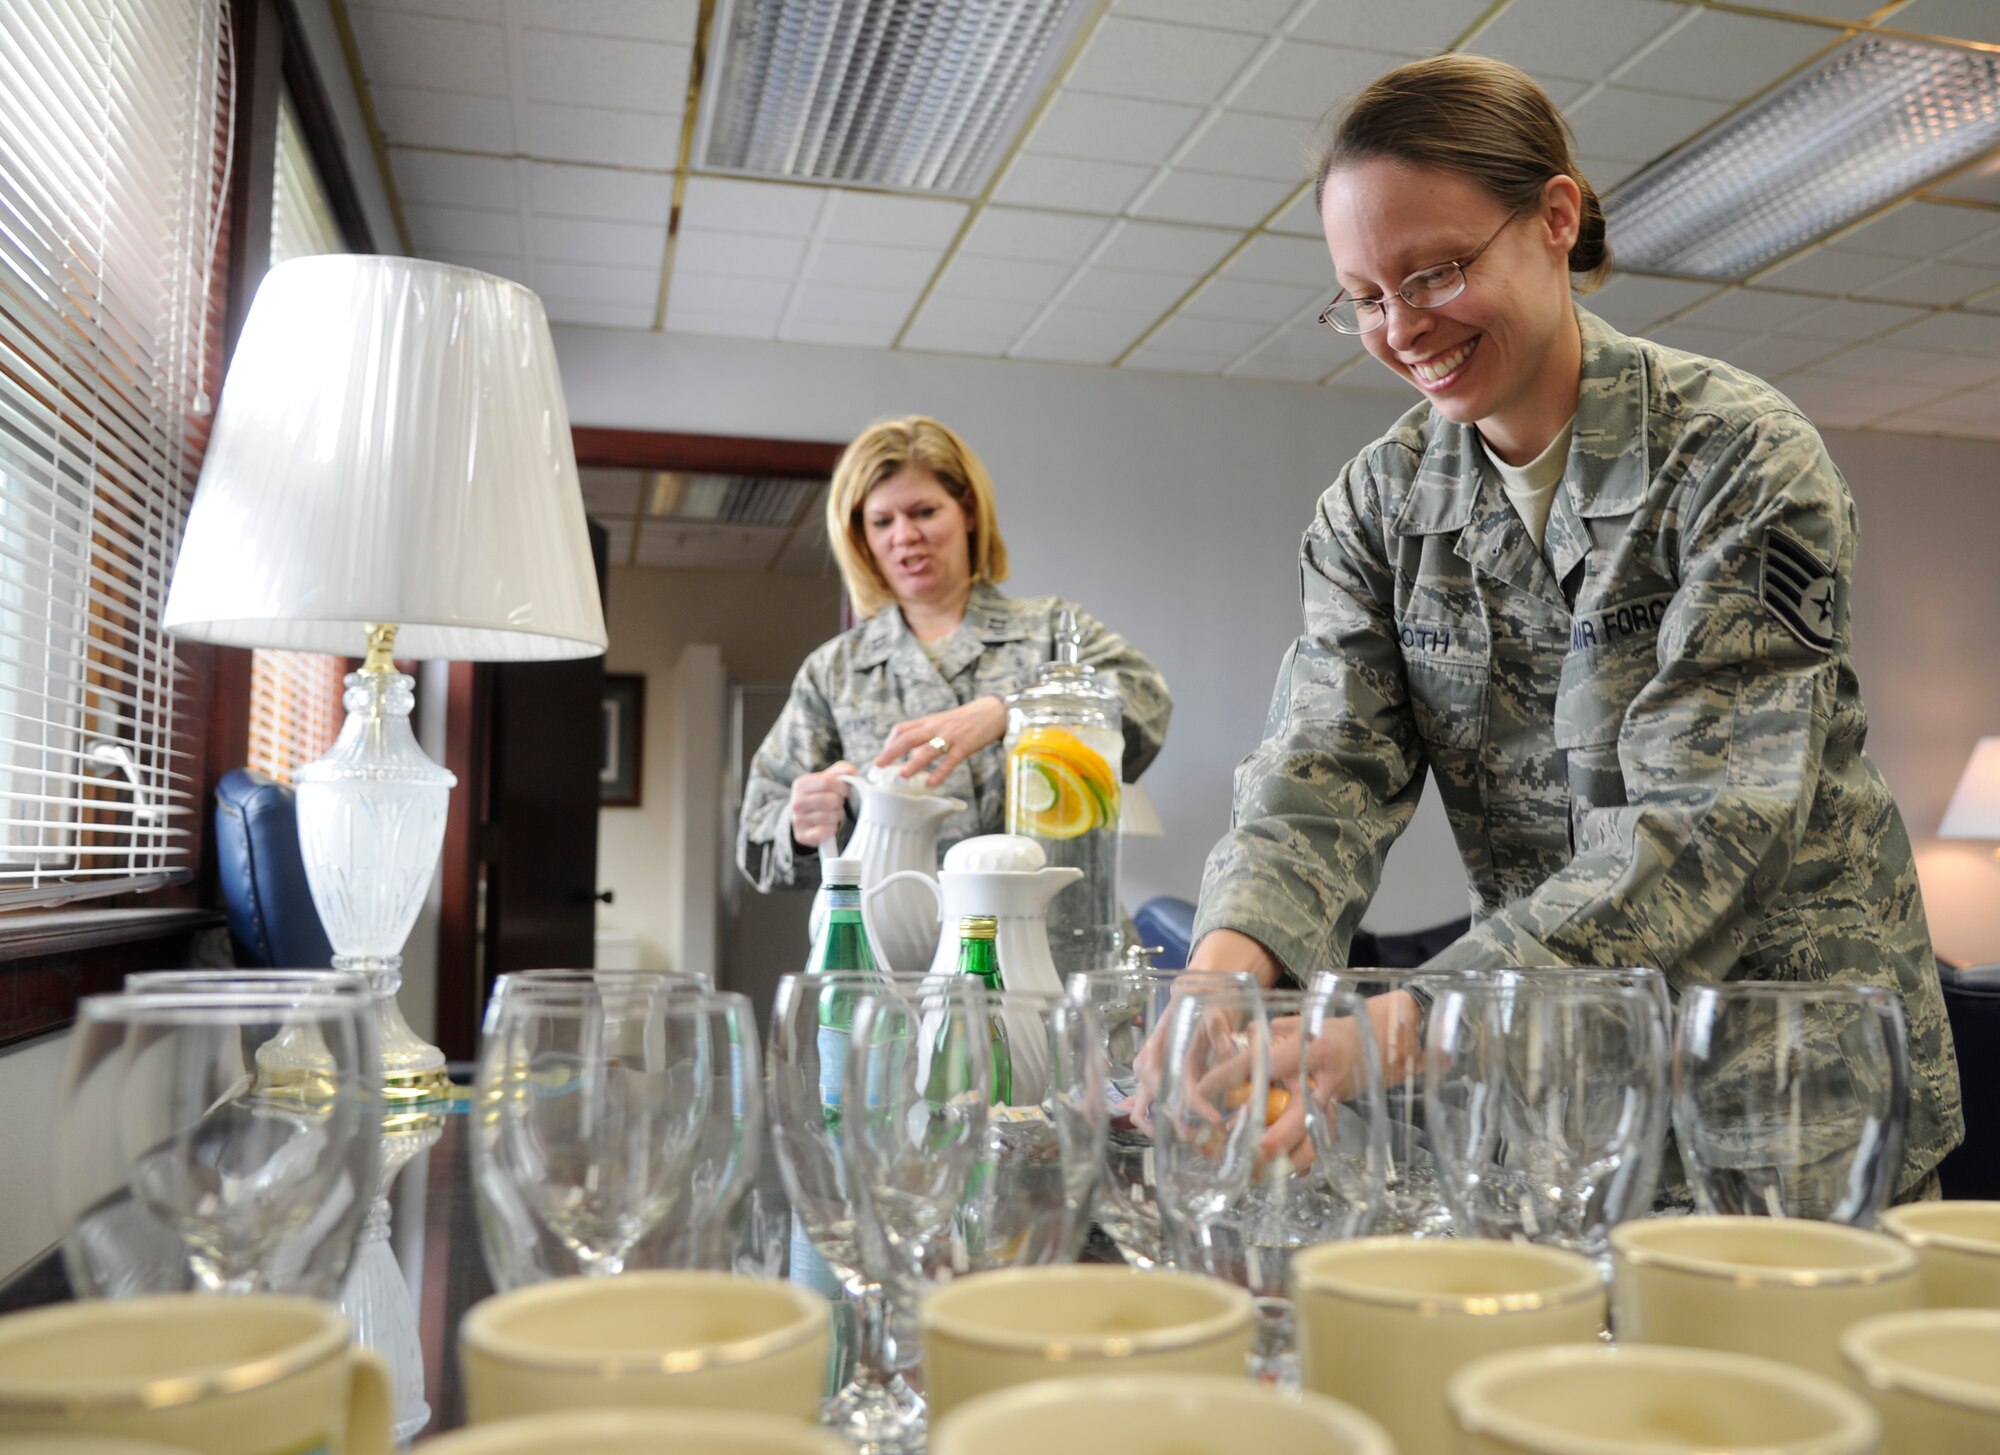 Staff Sgt. Christine Tooth, 92nd Air Refueling Wing protocol specialist, arranges water goblets during a recent visit by Gen. Raymond Johns, Jr., Air Mobility Command commander, at Fairchild Air Force Base, Wash., May 20, 2012. If something needs to be done, whether it’s picking up trash, pitching luggage or washing vehicles and someone else hasn't done their job, then the wing’s protocol office is there getting the mission done. (U.S. Air Force photo by Airman 1st Class Ryan Zeski/Released)